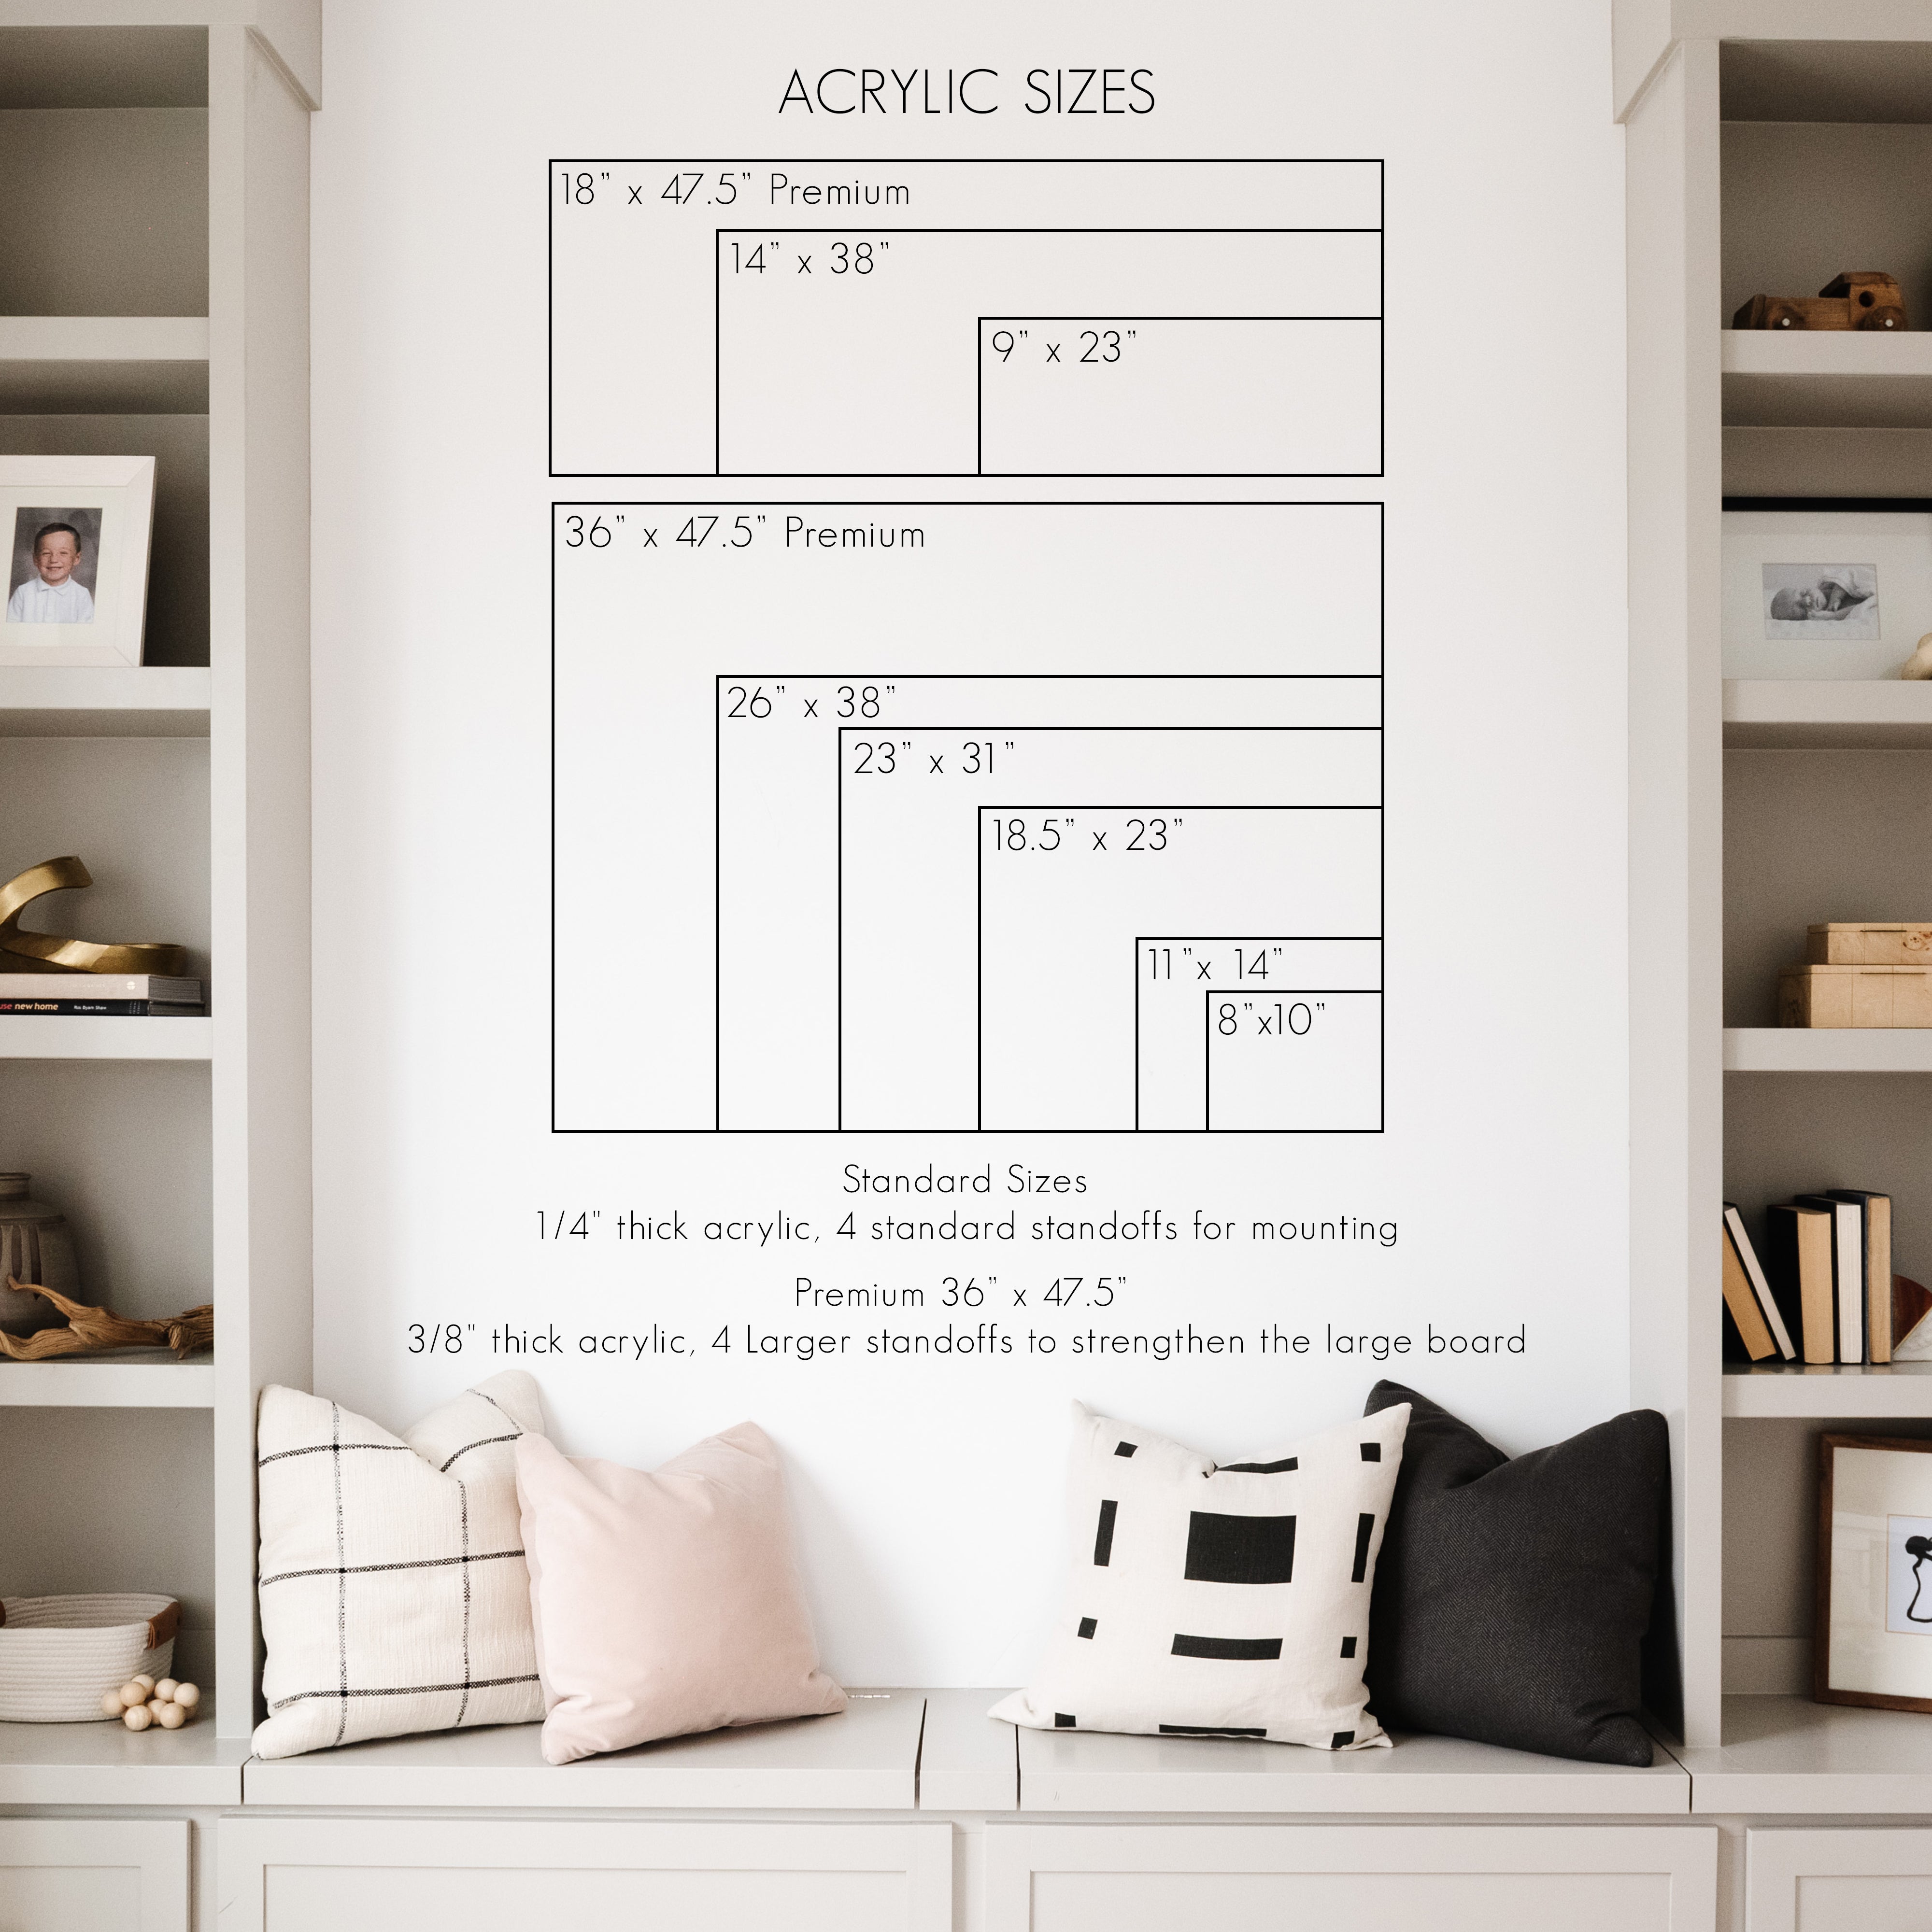 Weekly Frosted Acrylic Calendar + 2 Sections | Horizontal Madi